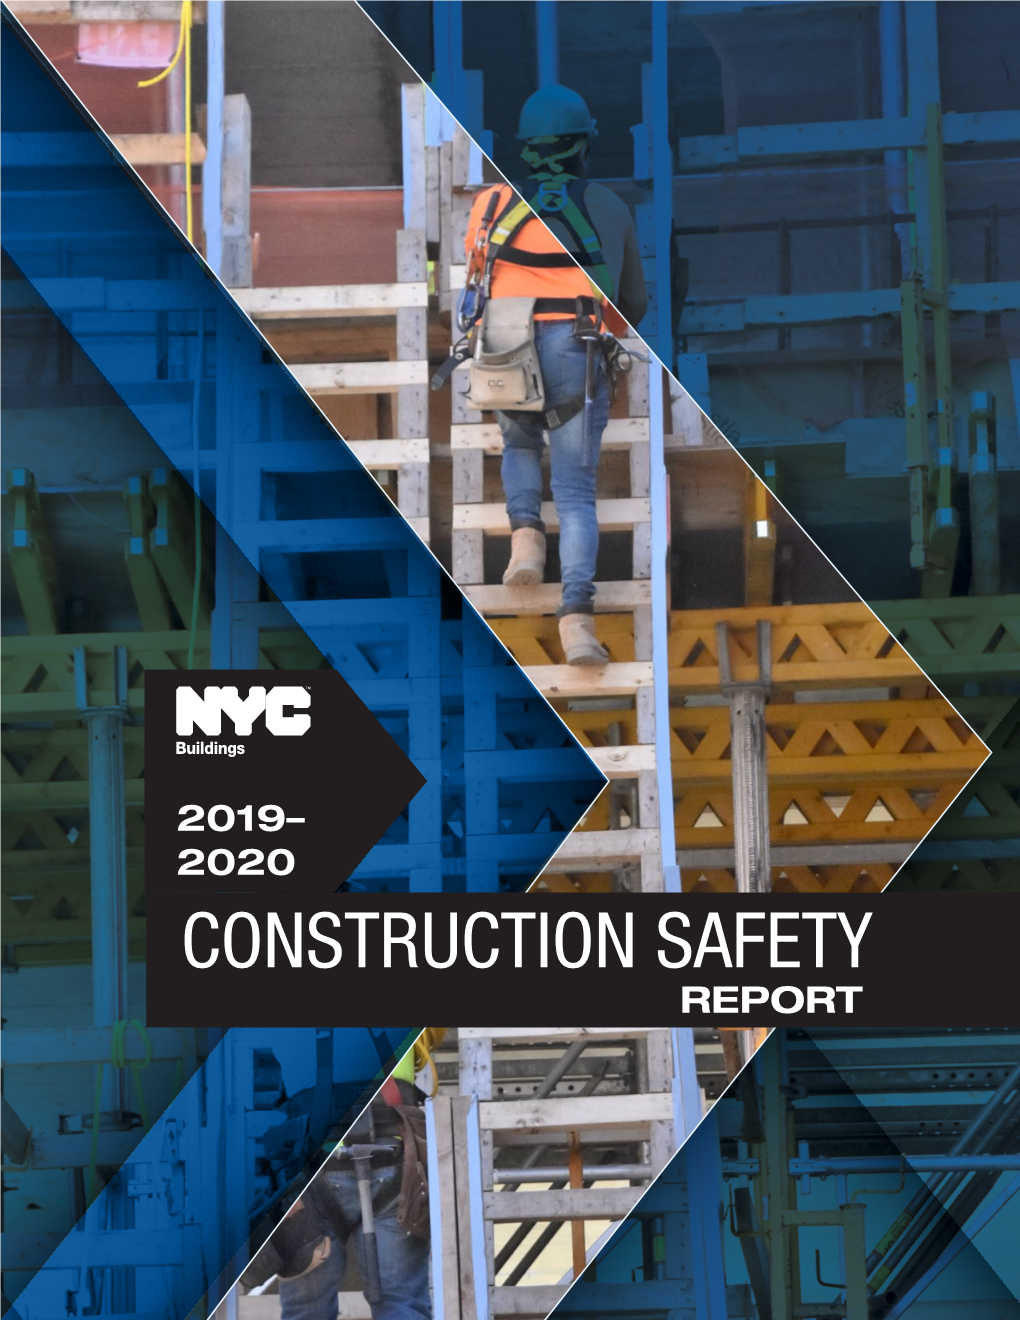 Read the 2019-2020 Construction Safety Report